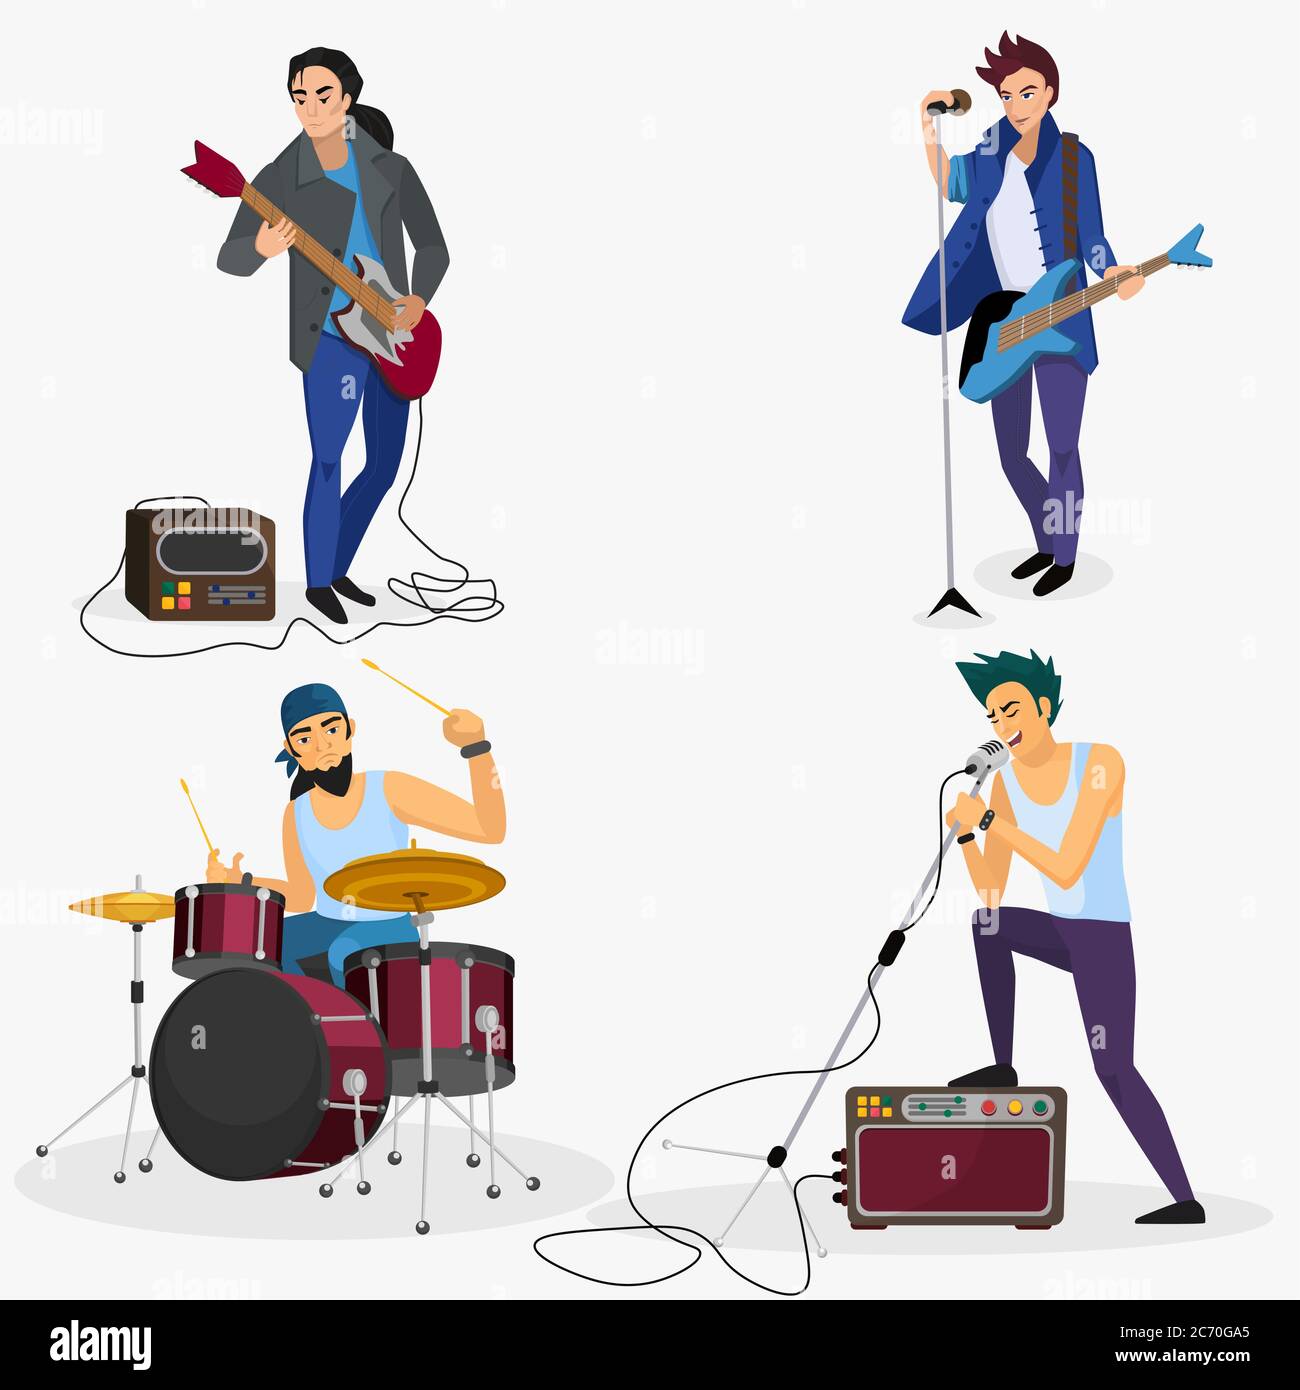 Rock band members isolated. Musical group singer, drummer, guitar player cartoon vector illustration Stock Vector